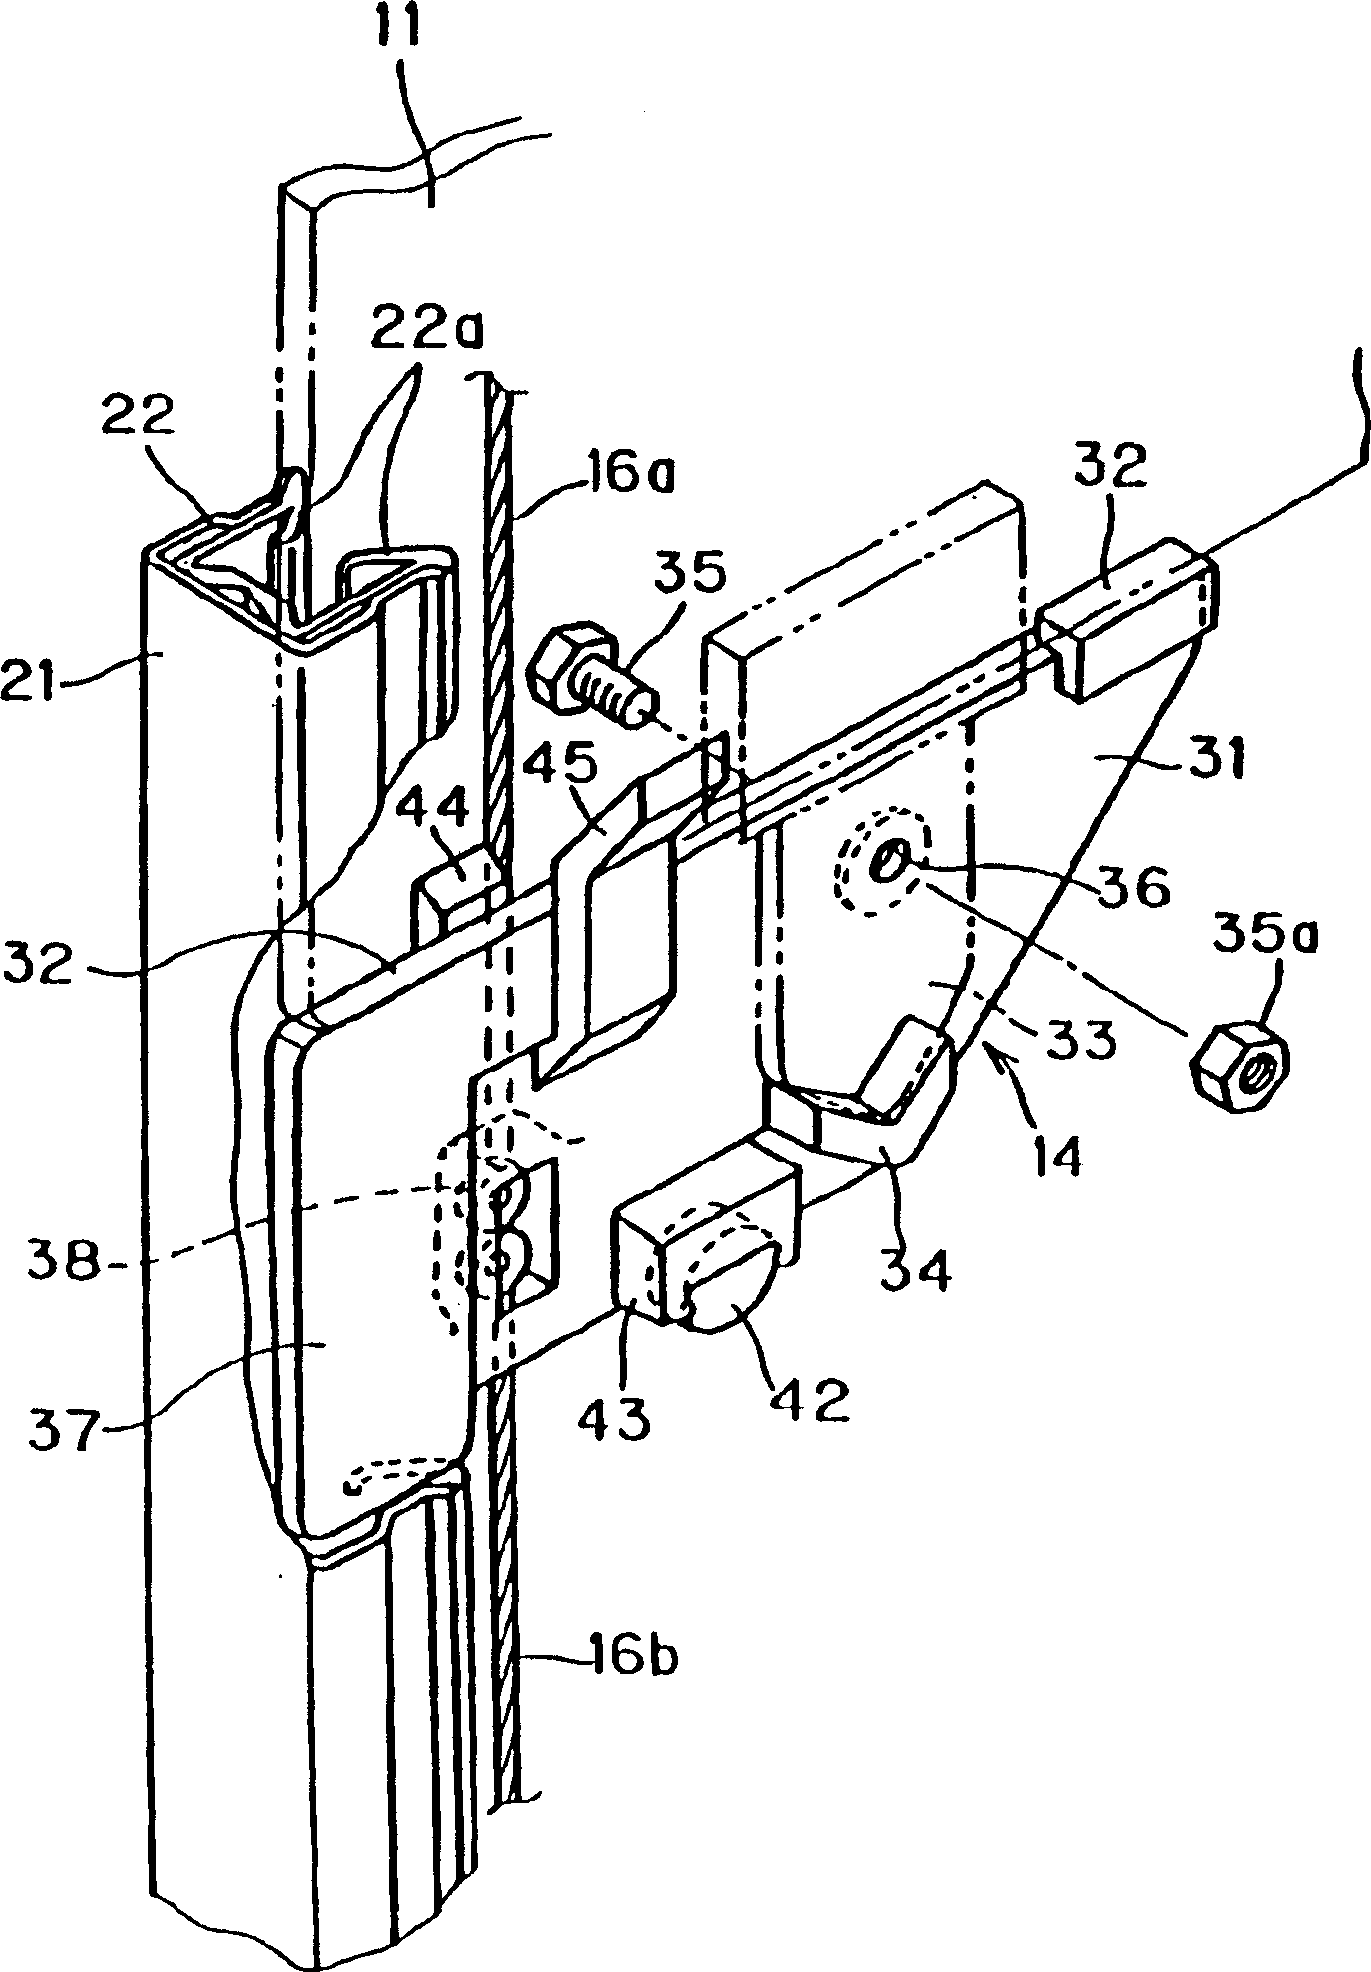 Curved galss support structure and window galss closing-opening regulator